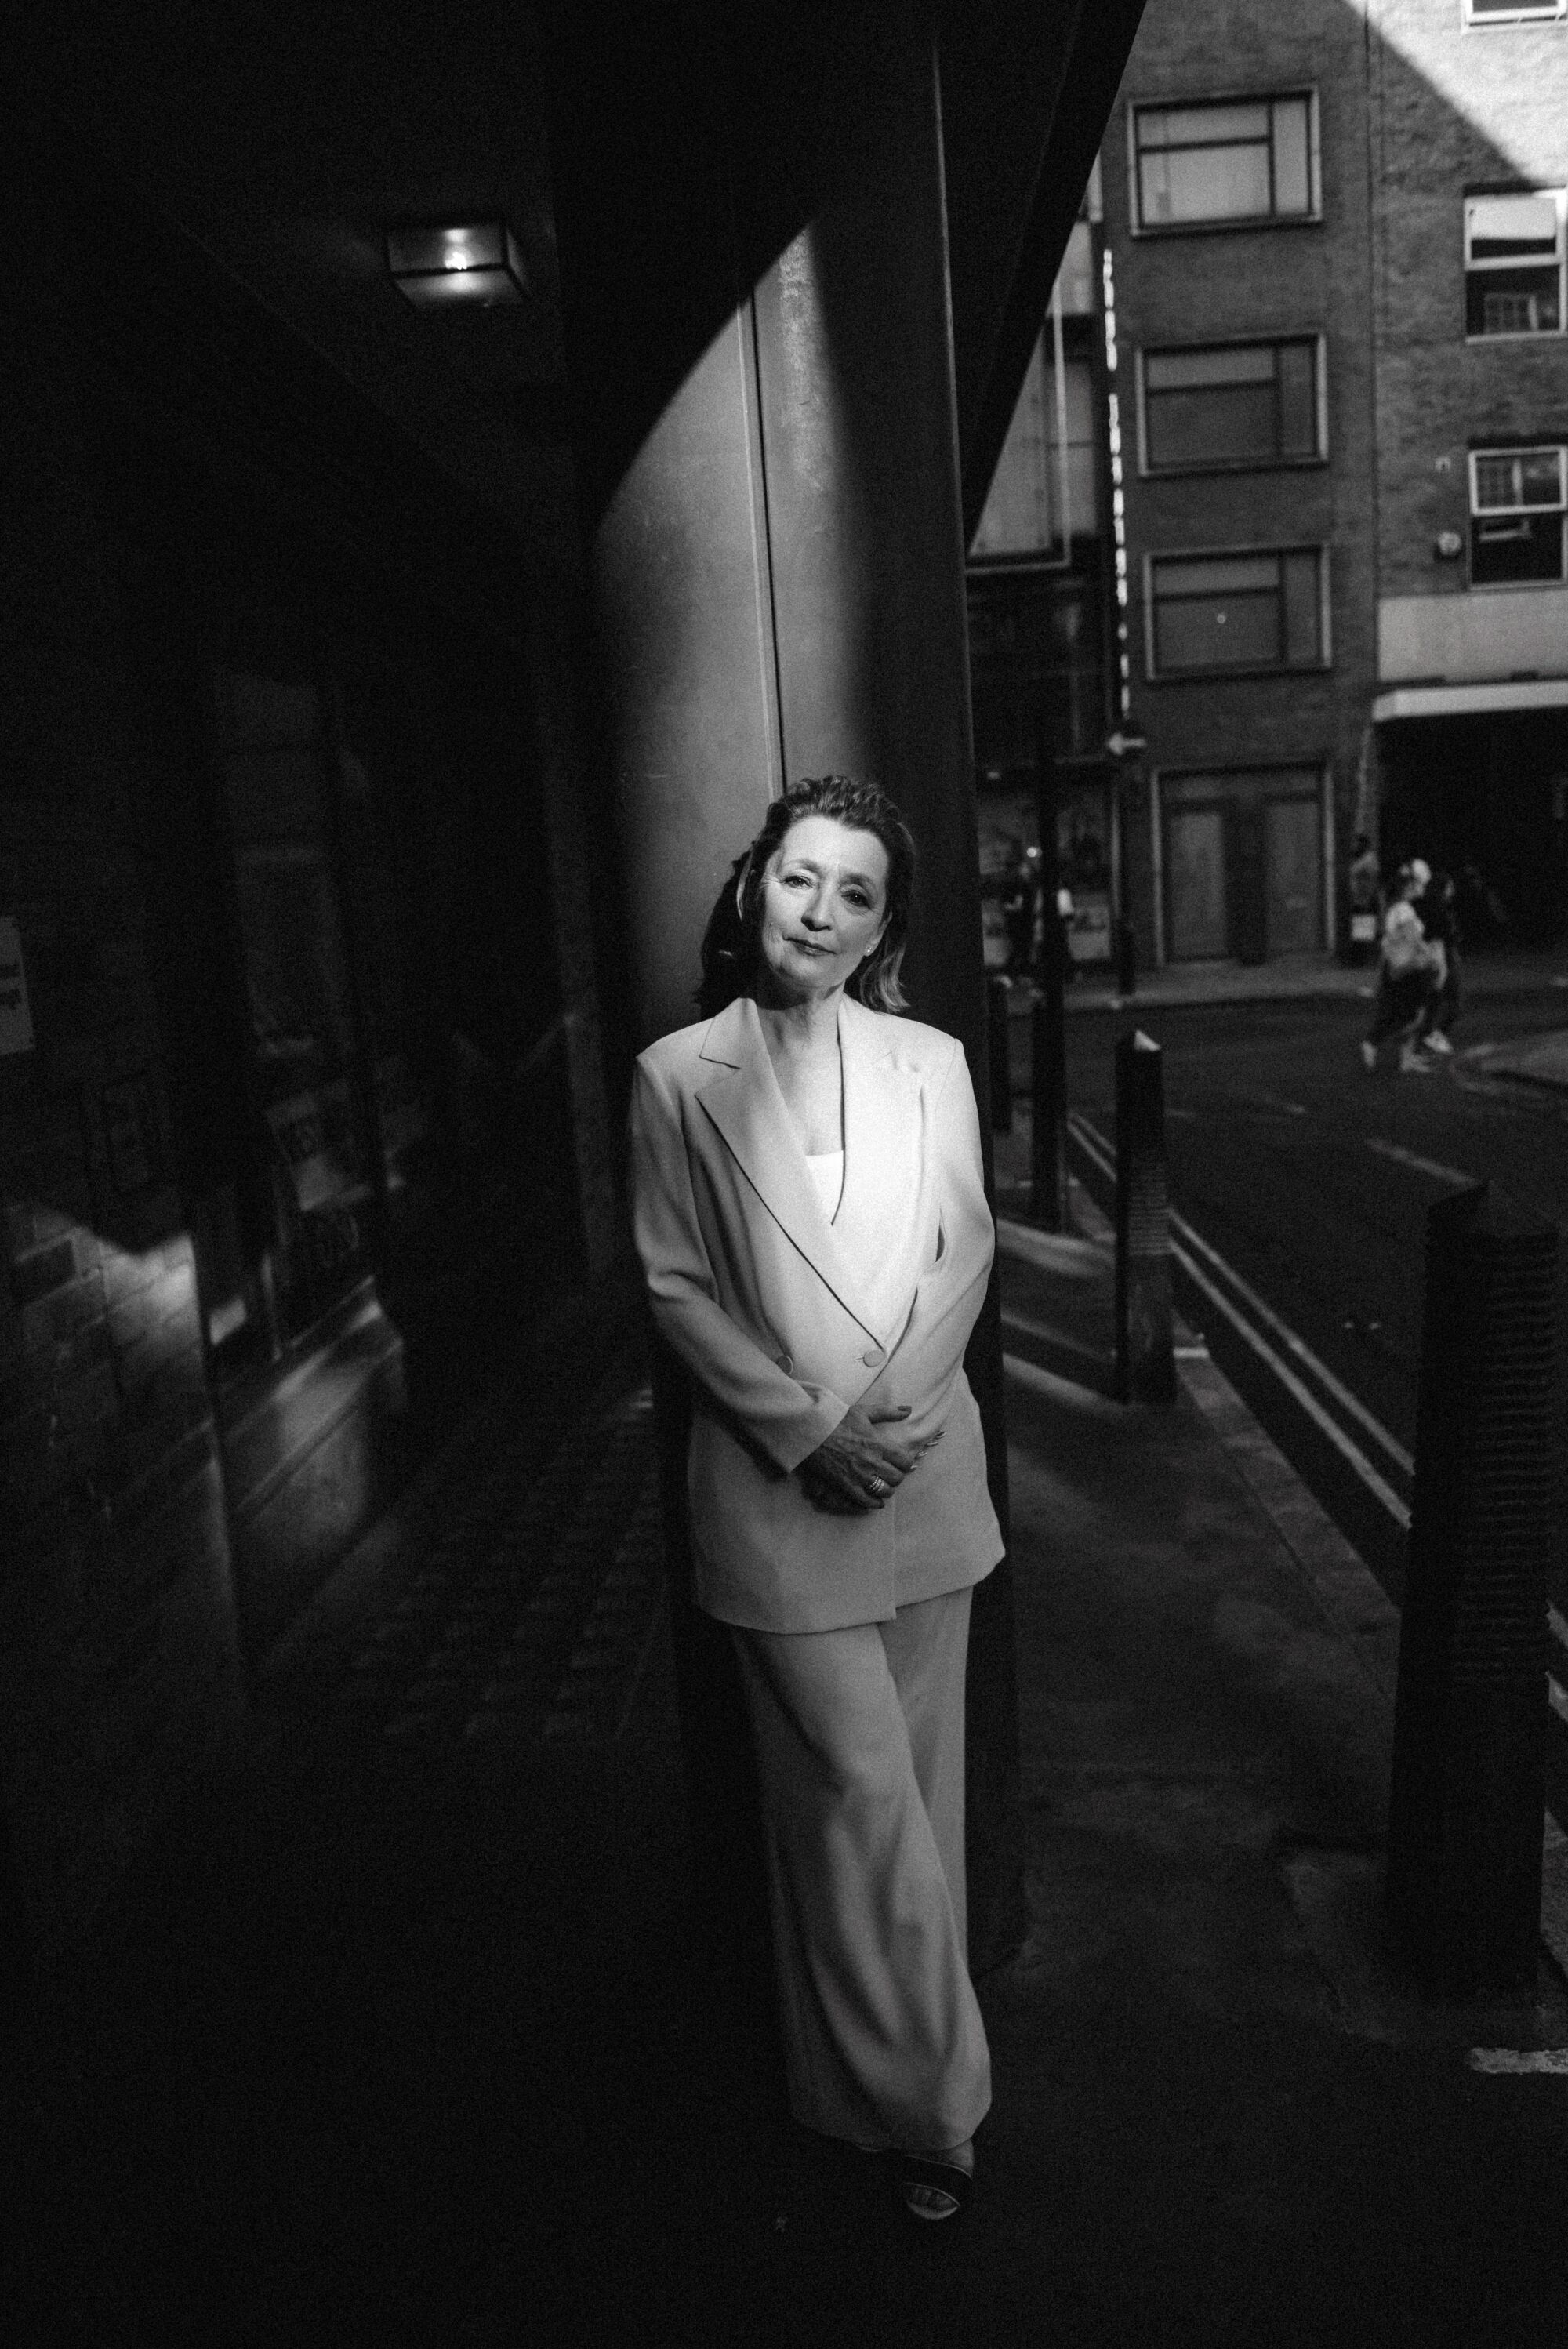 A woman in a white suit leans against a pole outdoors as sunshine hits her